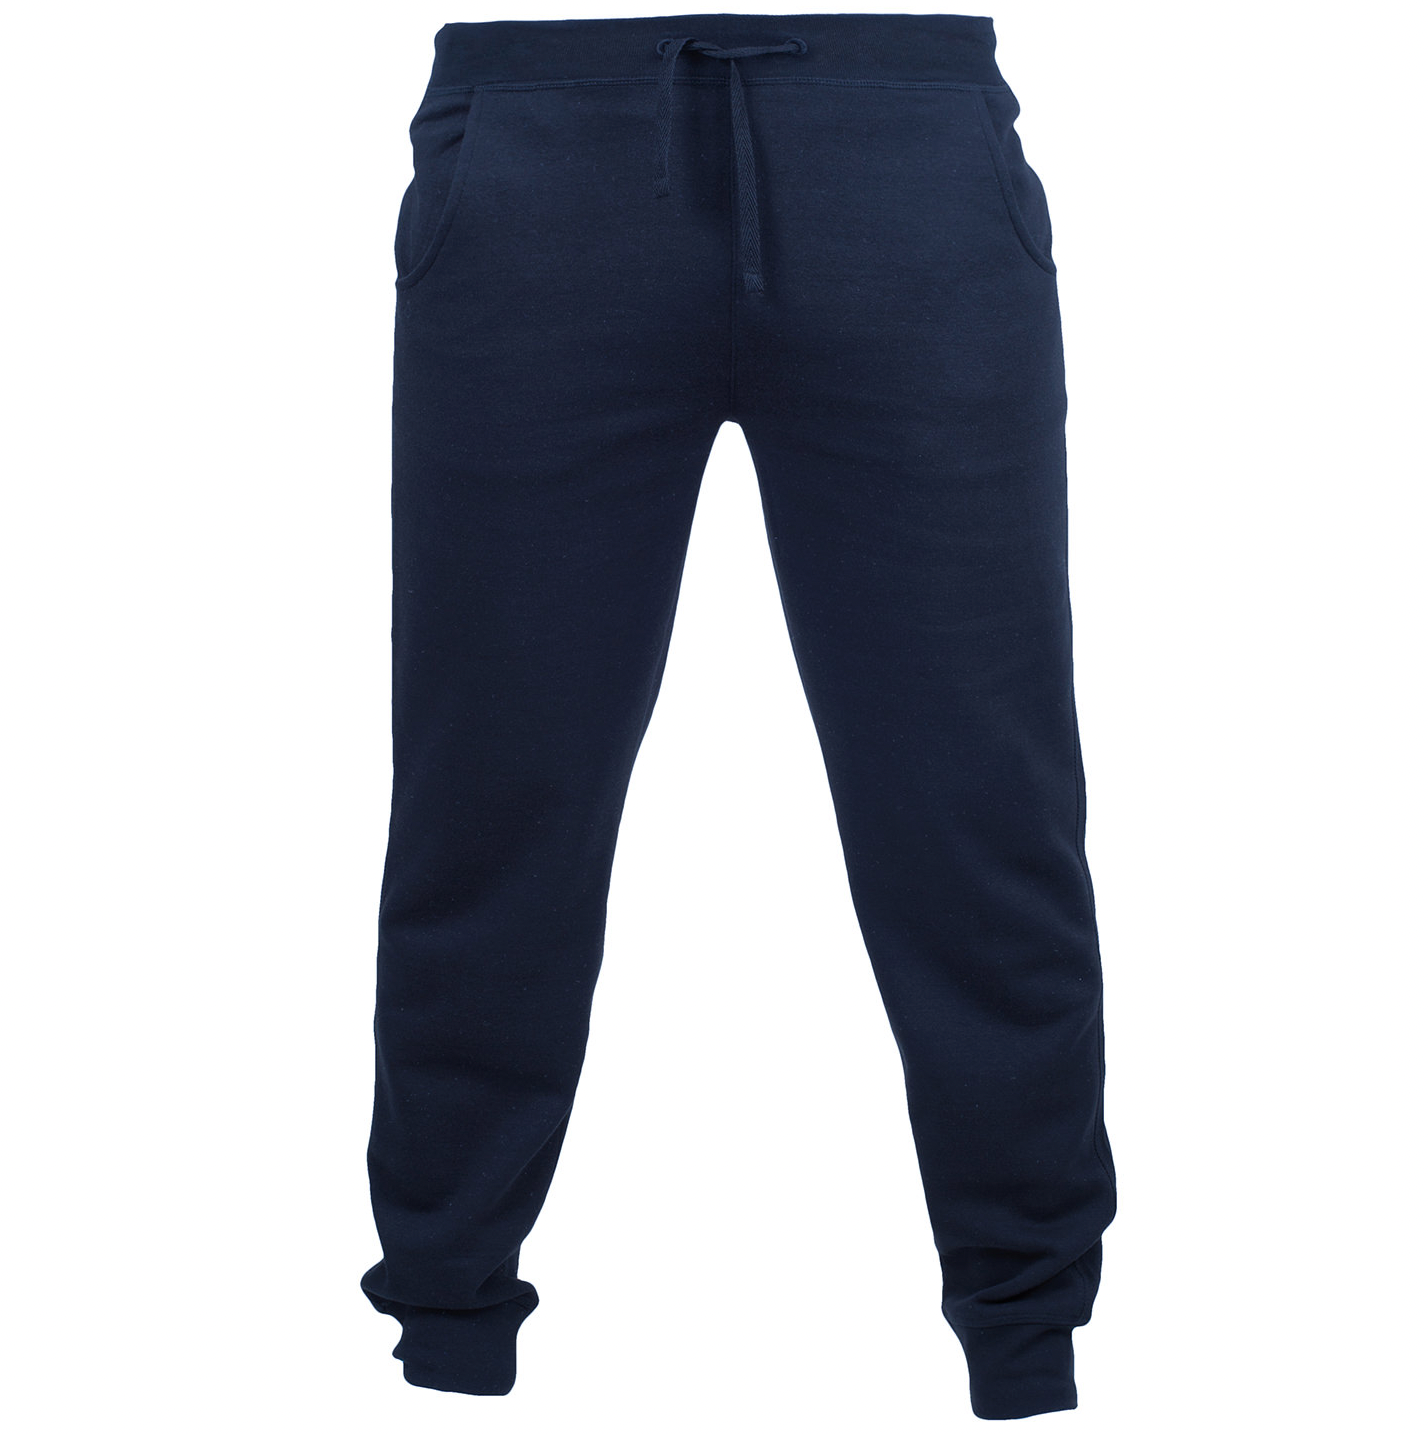 SKINNIFIT | SLIM CUFFED JOGGERS | PLUS EMBROIDERED LOGO TO LEFT POCKET